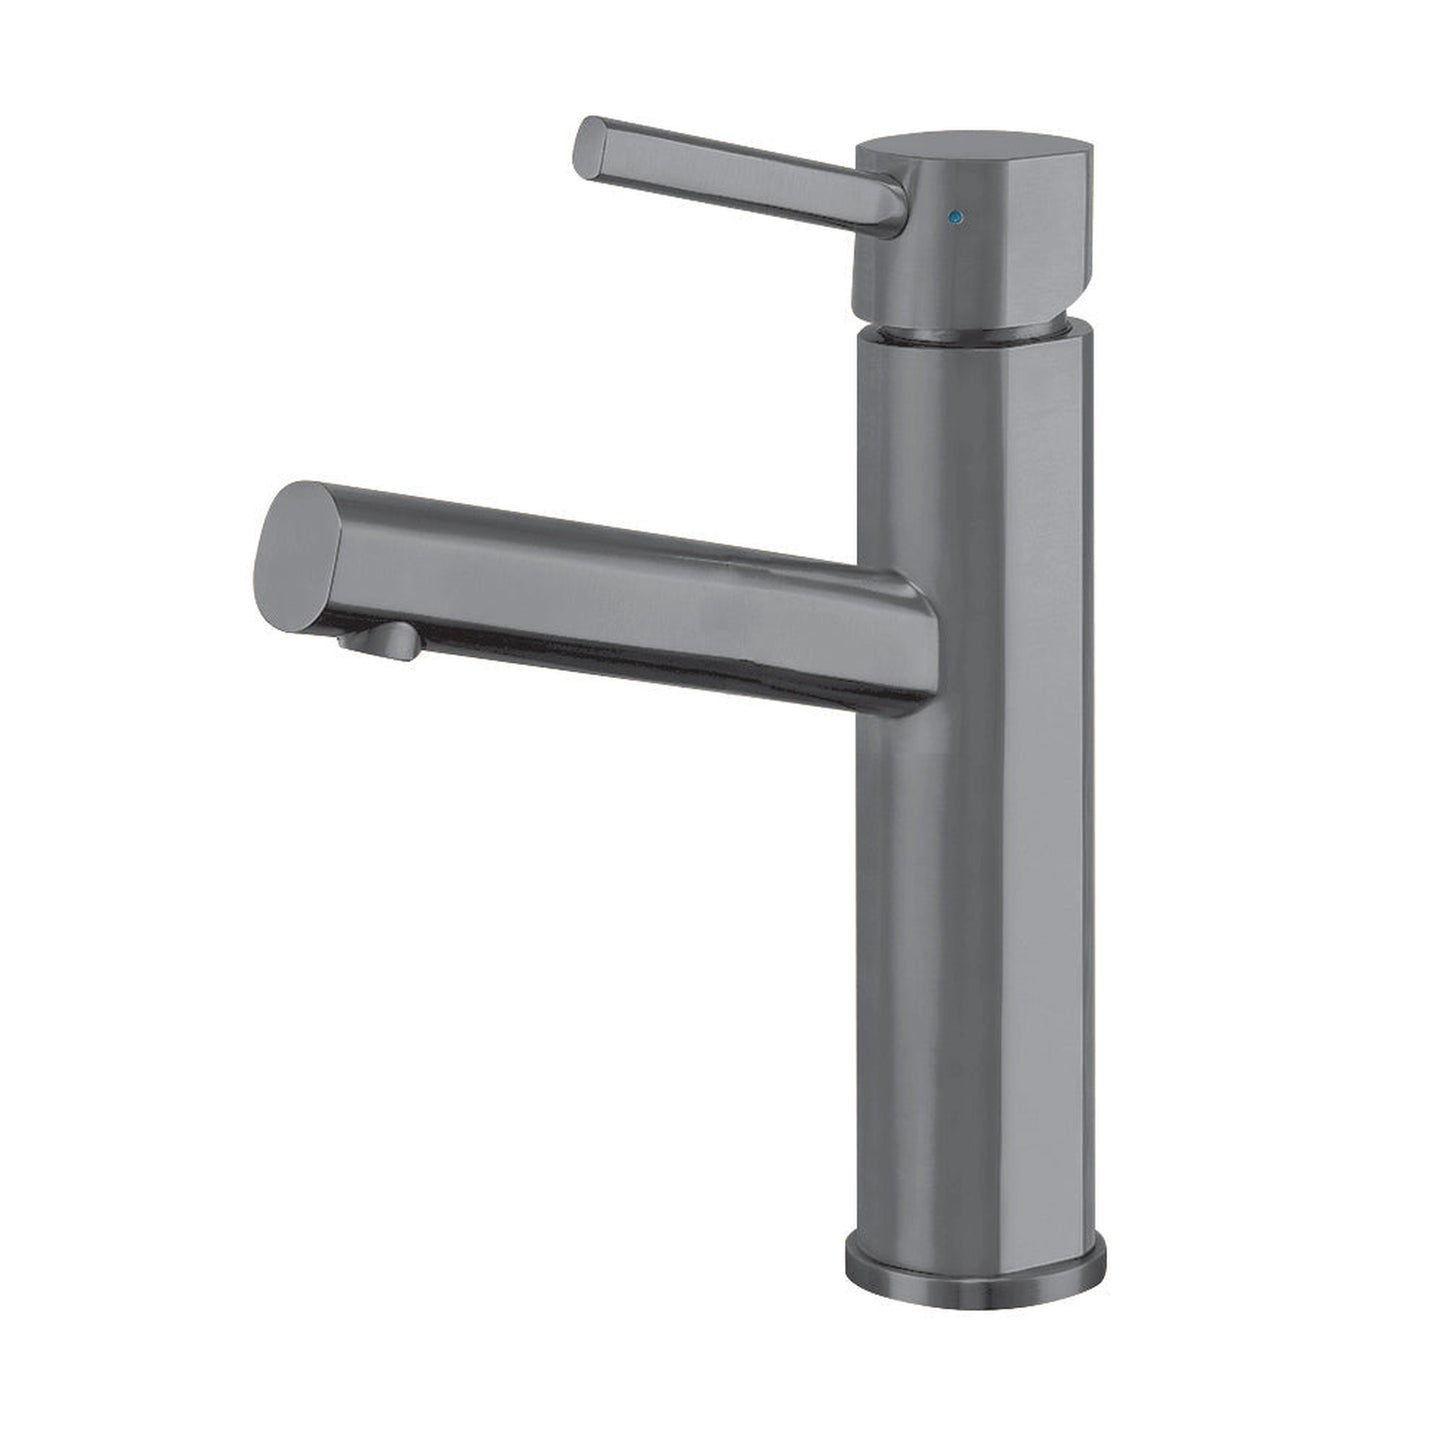 Whitehaus Waterhaus WHS1206-SB-GM Gunmetal Lead-Free Solid Stainless Steel Single Lever Elevated Lavatory Faucet